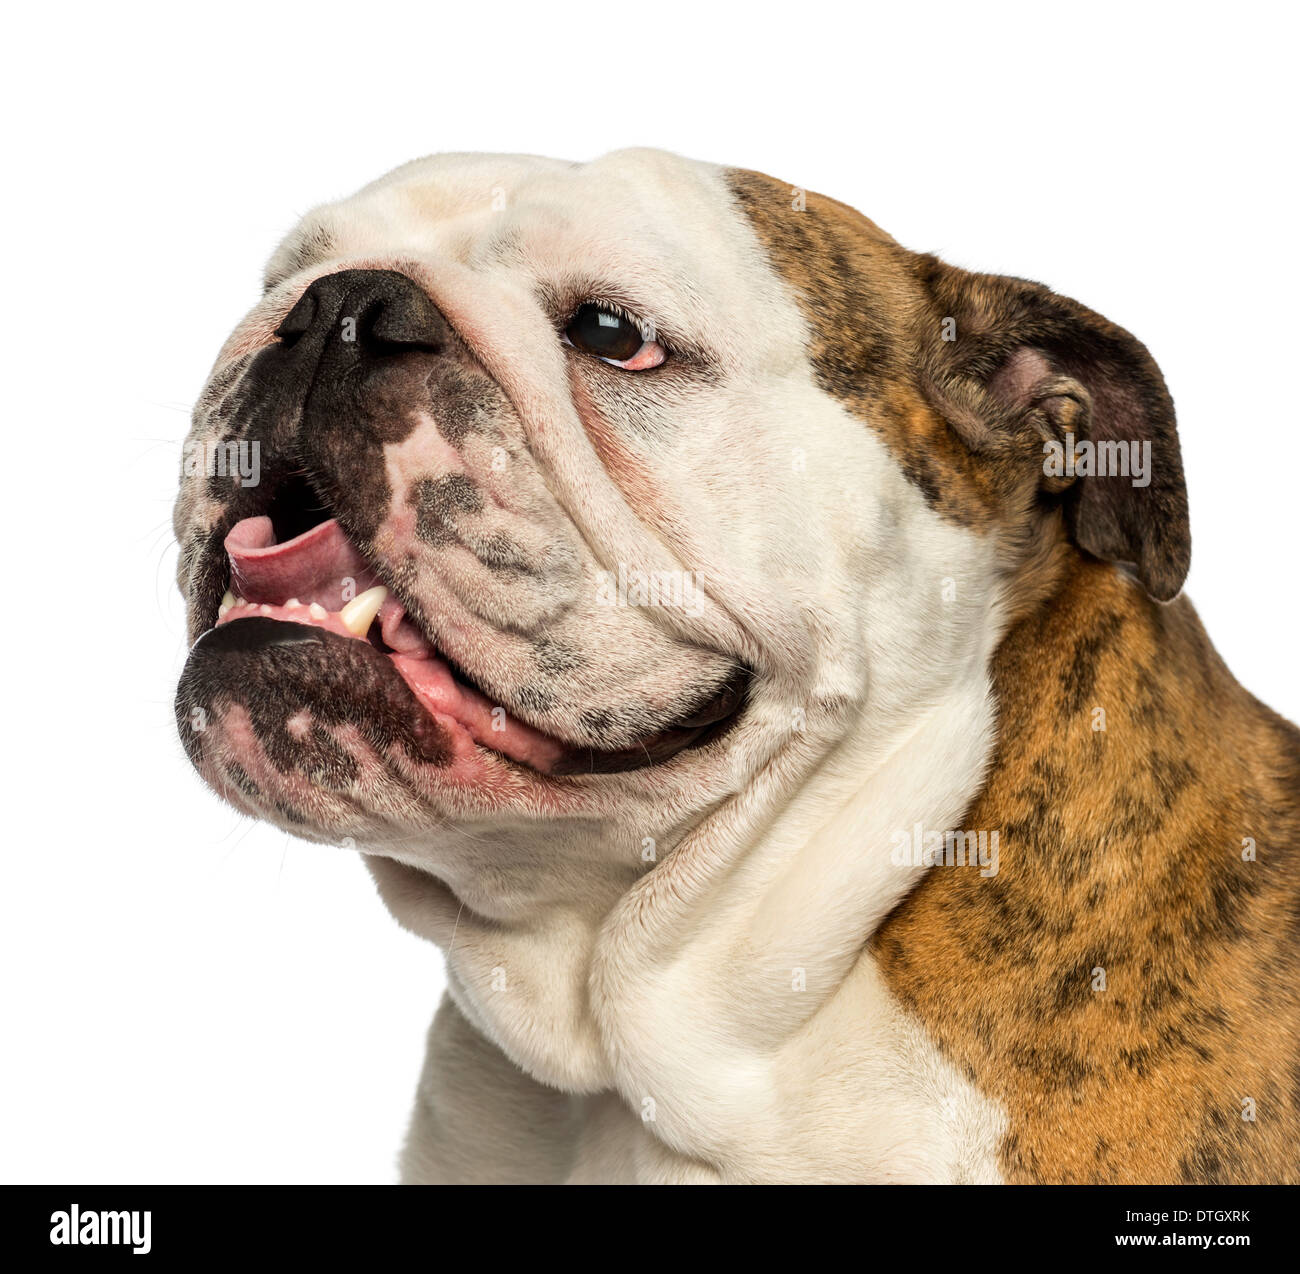 Close-up of an English bulldog panting against white background Stock Photo